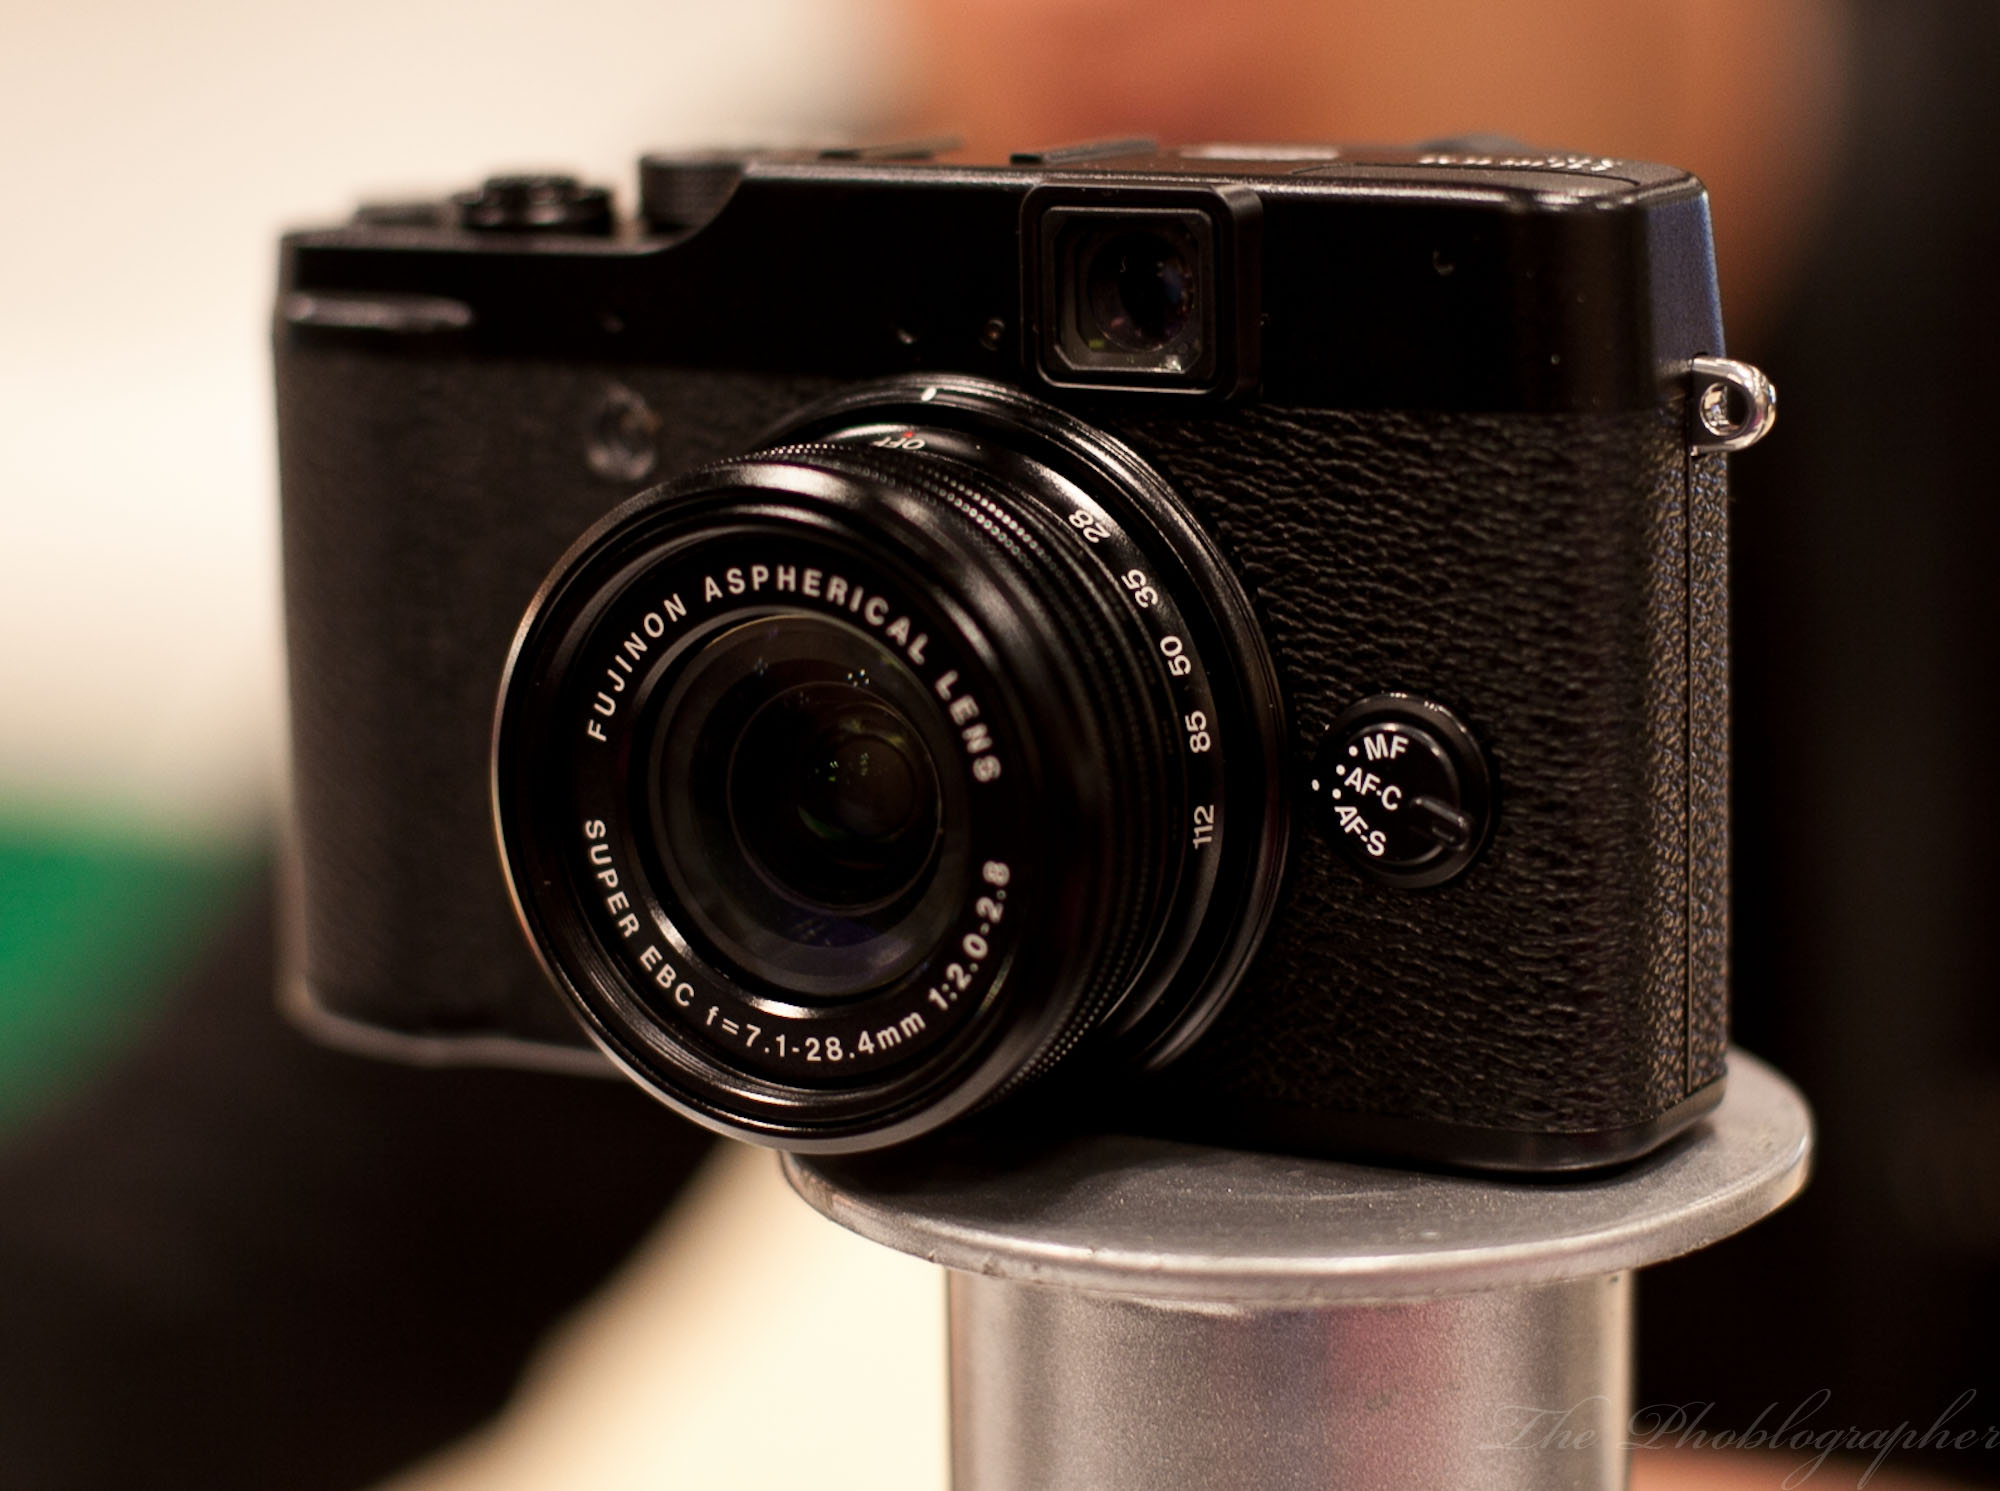 Chris Gampat The Phoblographer Fuji X10 hands on review (18 of 21)